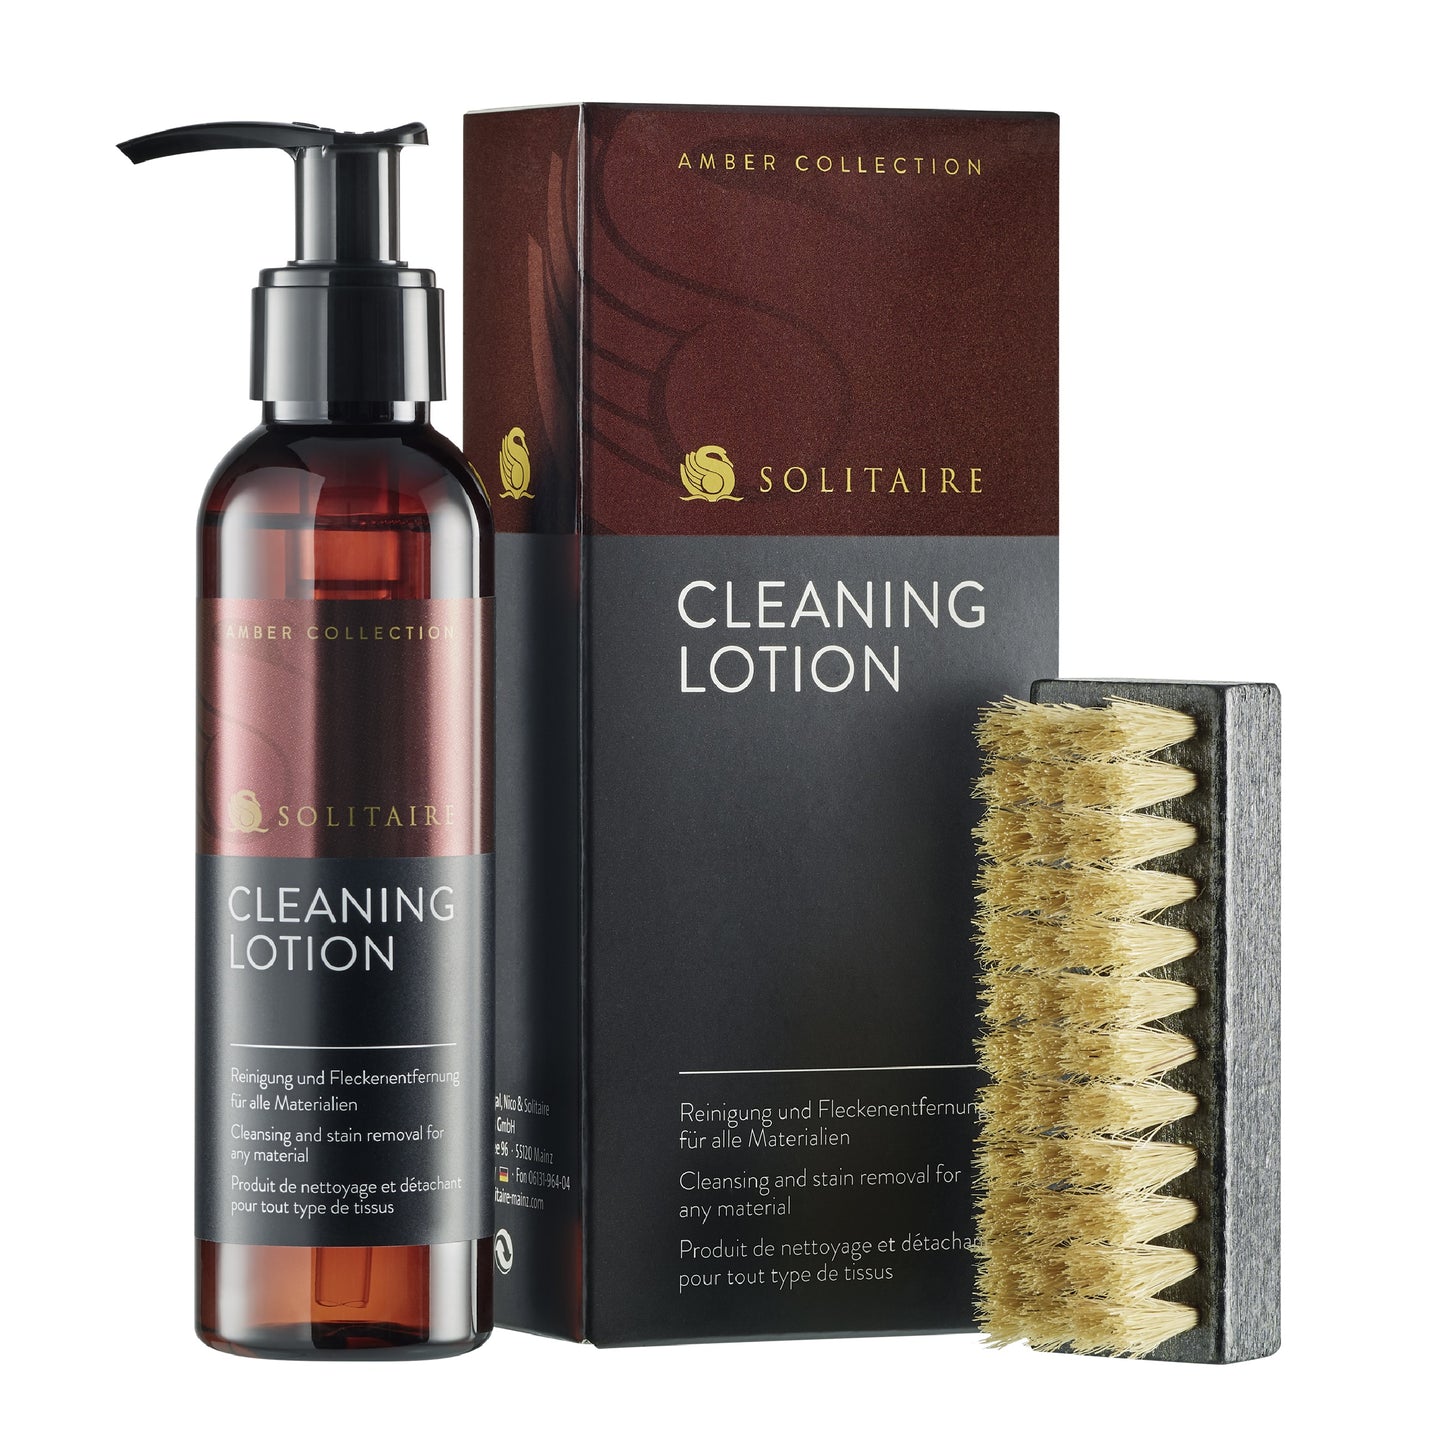 Solitaire Amber Collection Cleaning Lotion